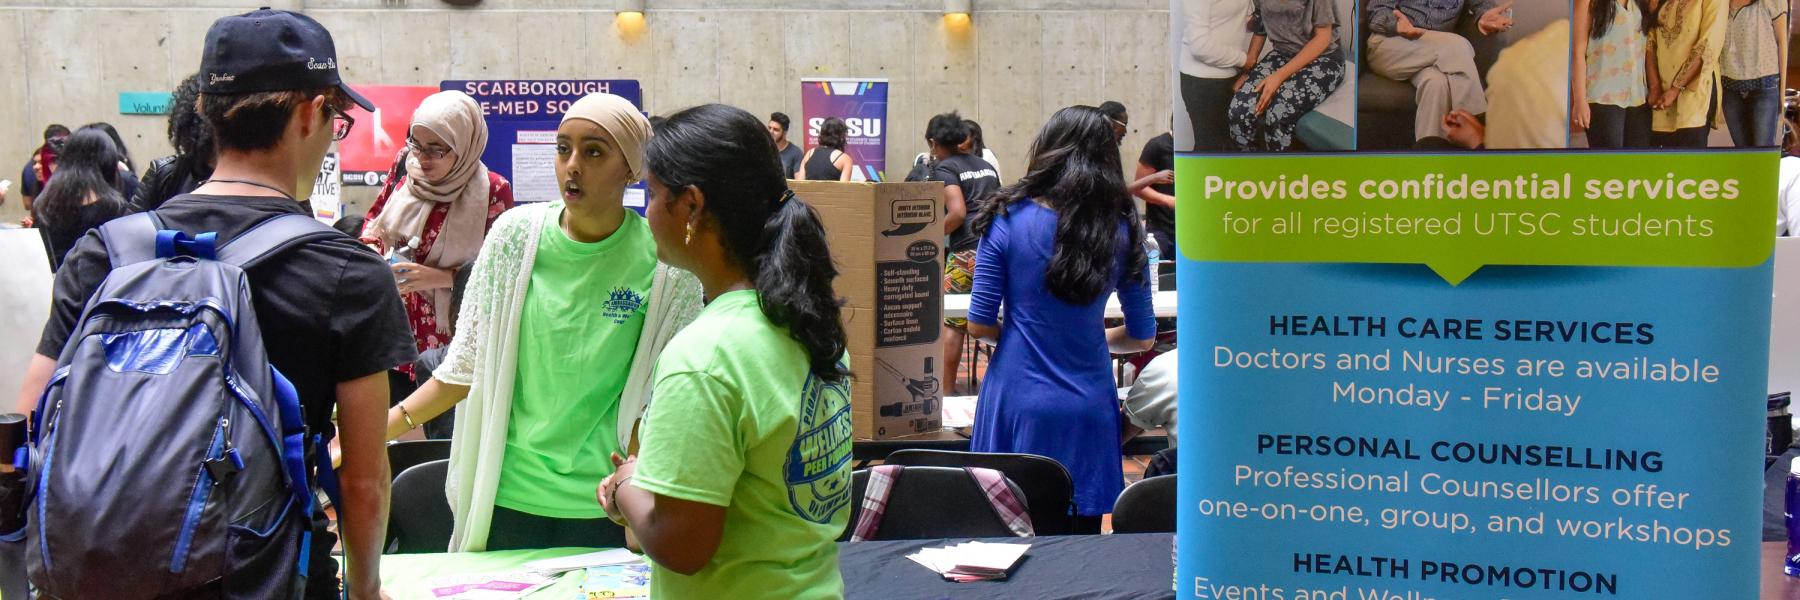 Group of students at a Health and Wellness information booth 